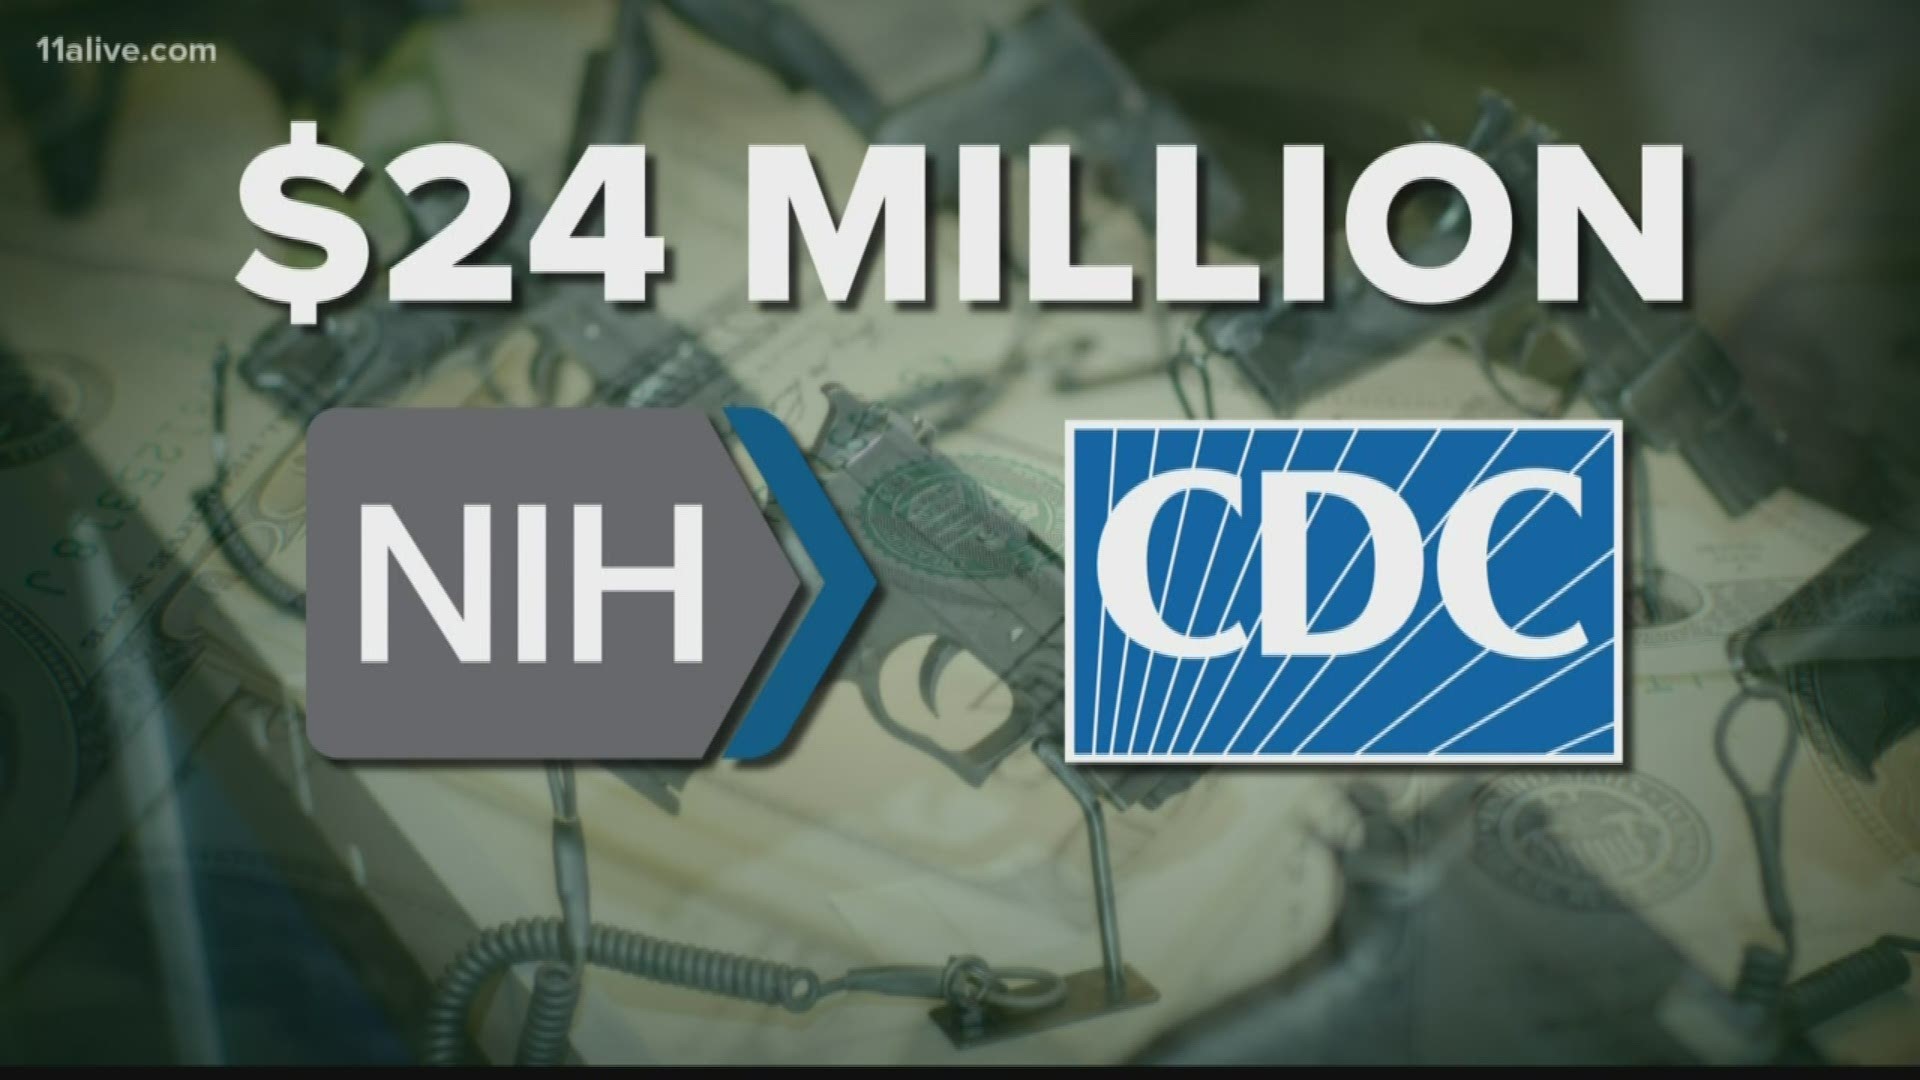 The Atlanta-based CDC and the National Institutes of Health will receive more than $20 million to study ways to prevent gun injuries and deaths.